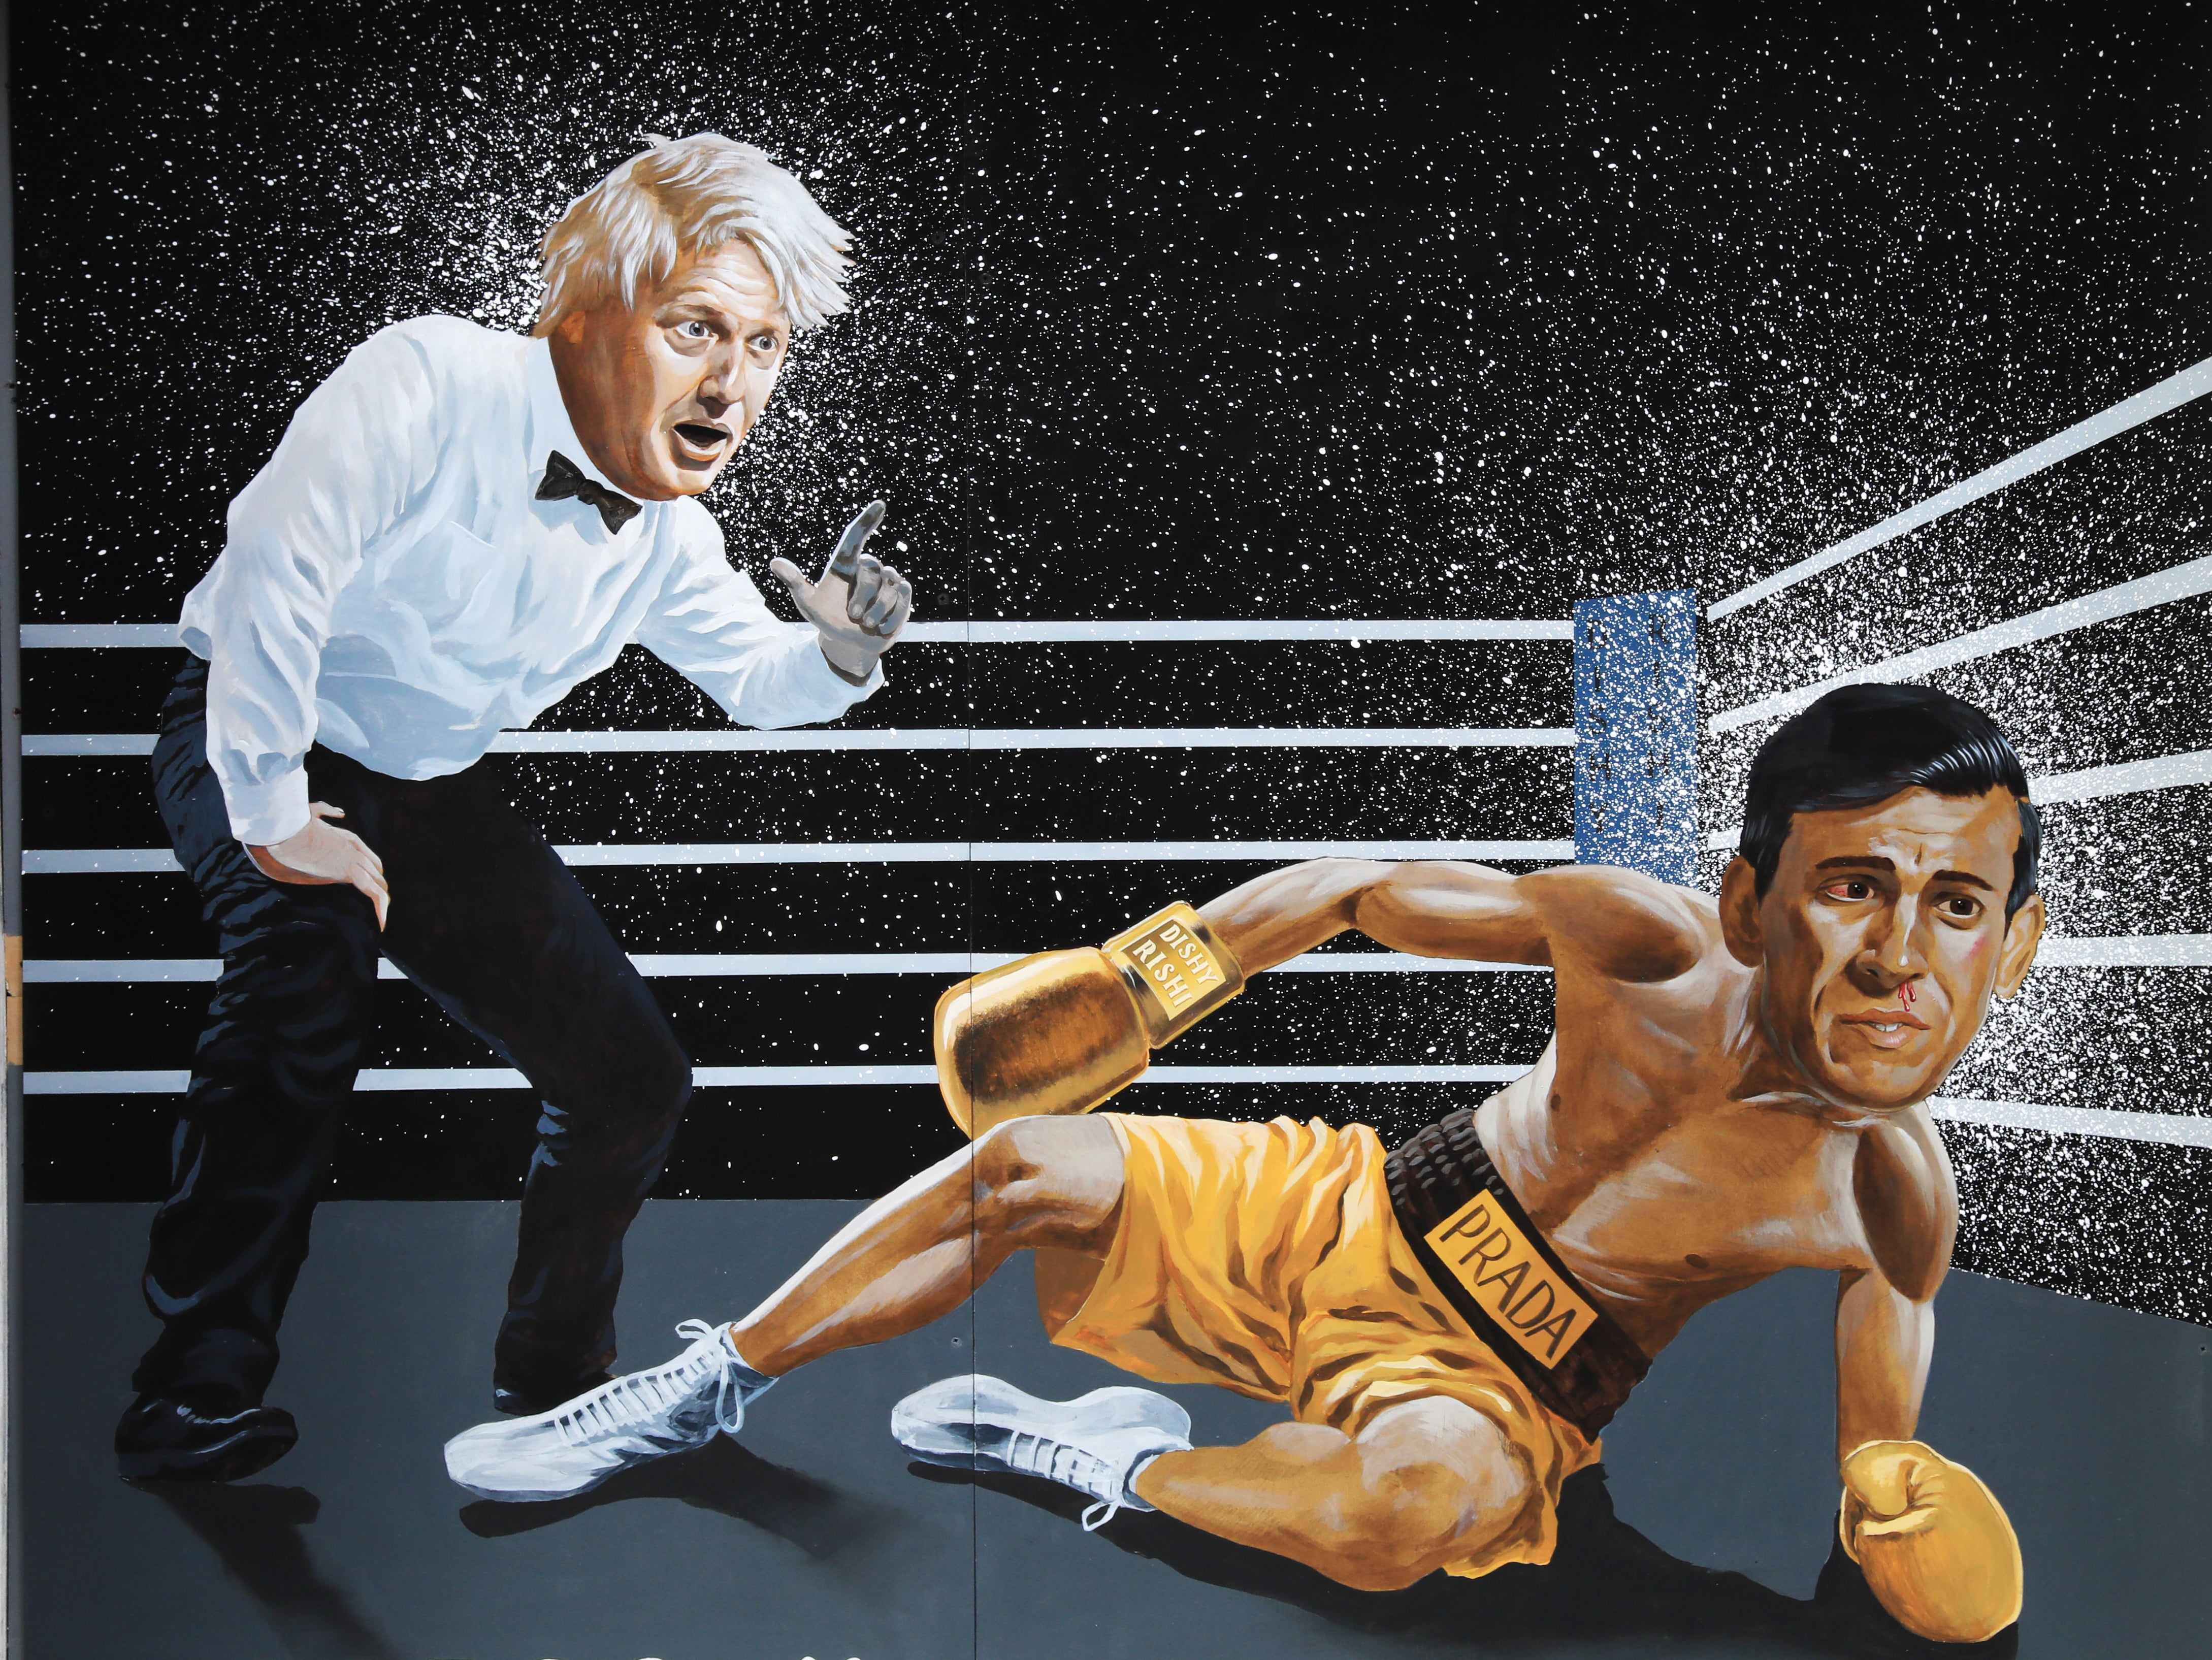 A mural by the artist Ciaran Gallagher depicts Boris Johnson counting out Rishi Sunak